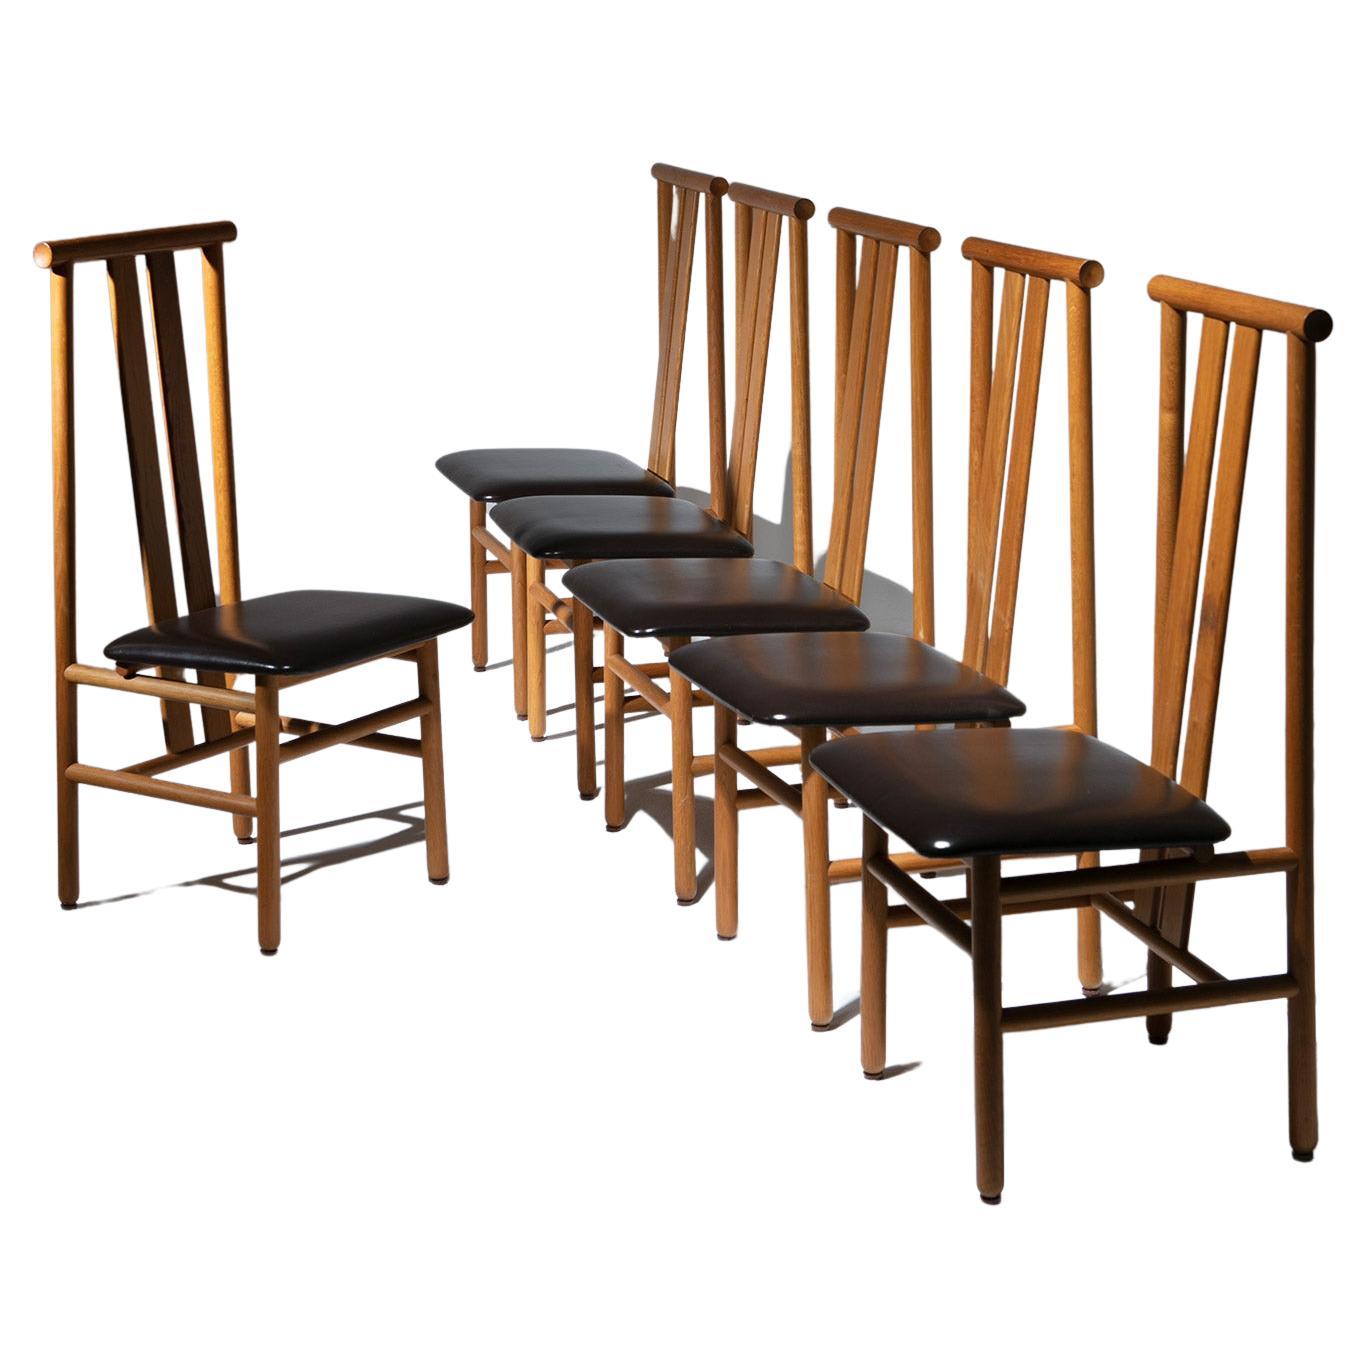 Set of Six "Zea" Dining Chairs by Annig Sarian for T70, Italy, 1980s